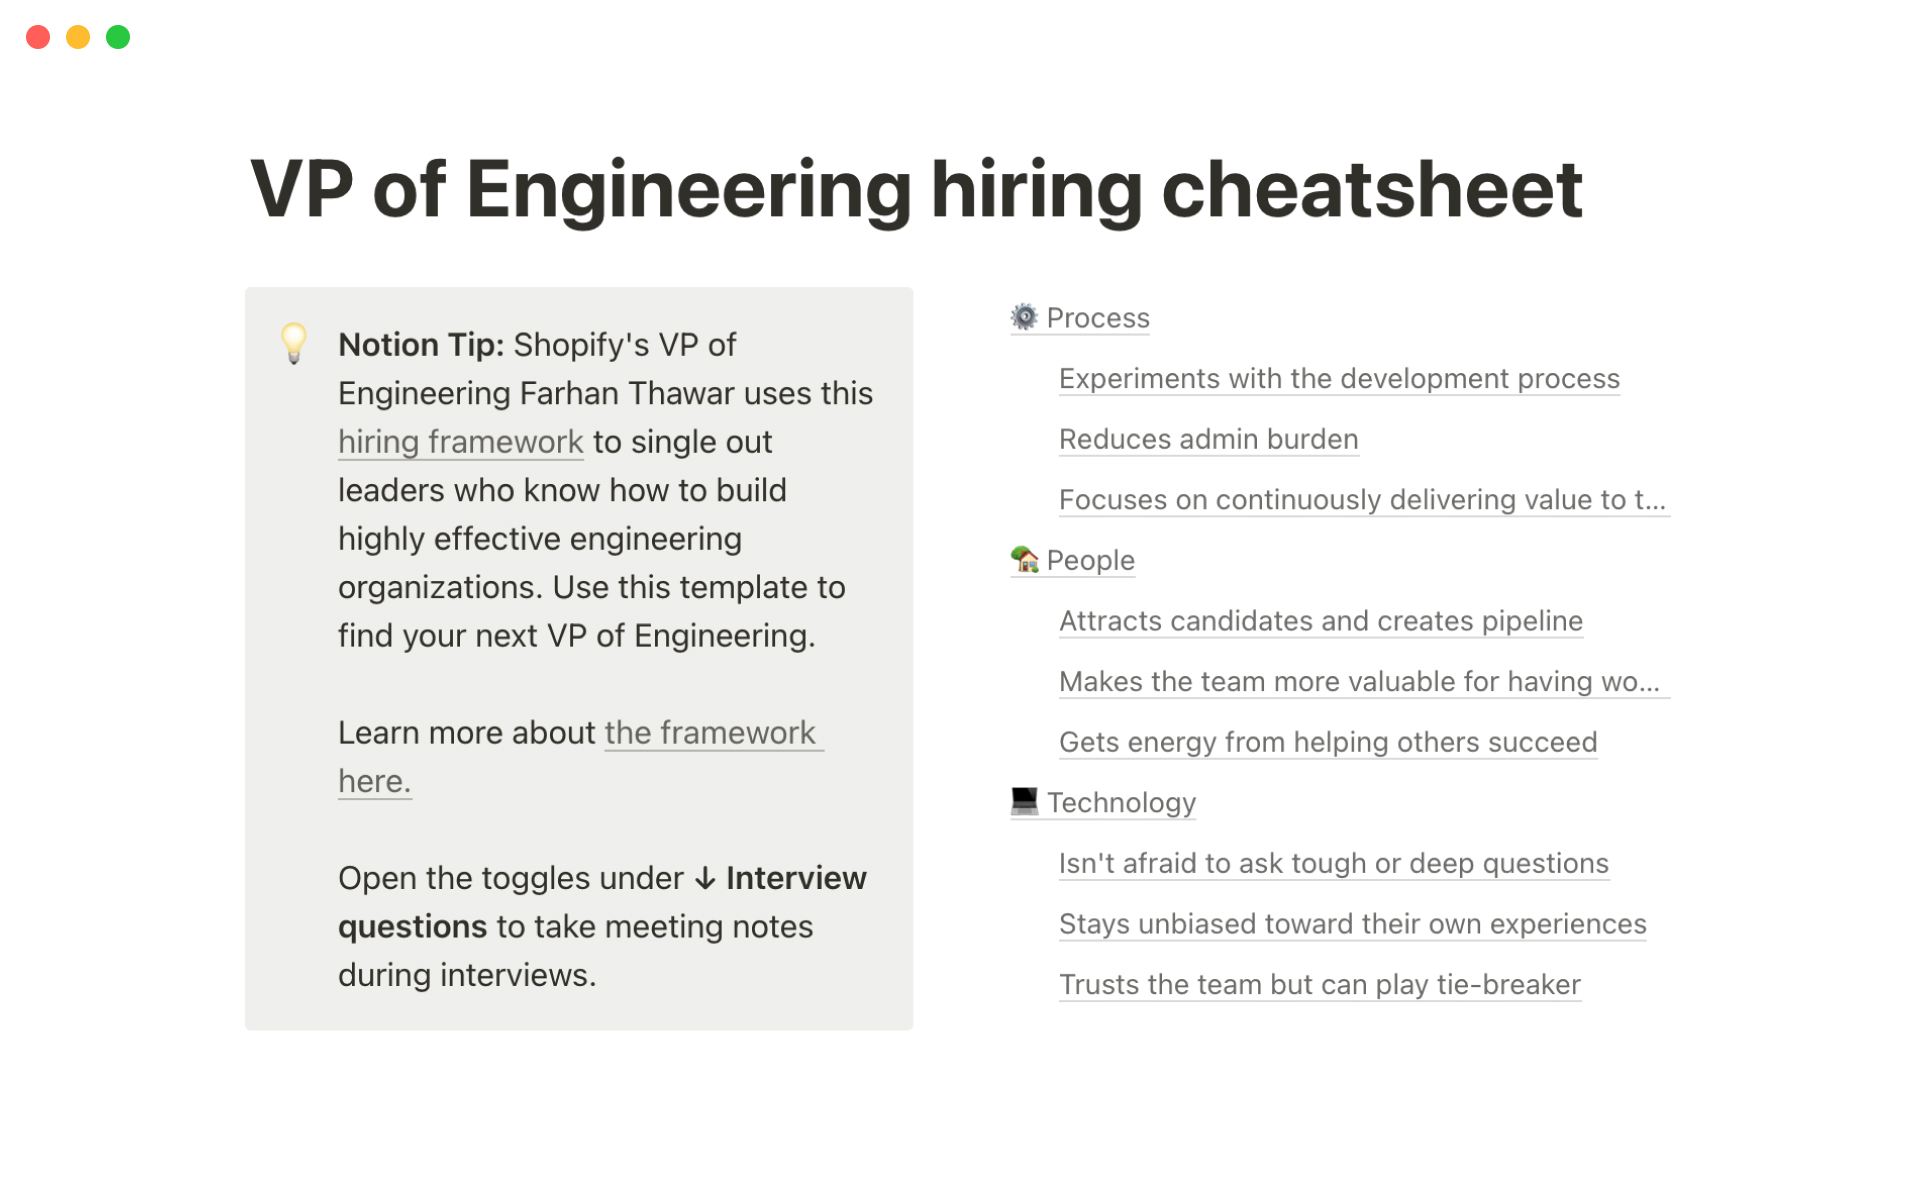 Use Shopify's template to streamline the hiring process and find your next VP of engineering.